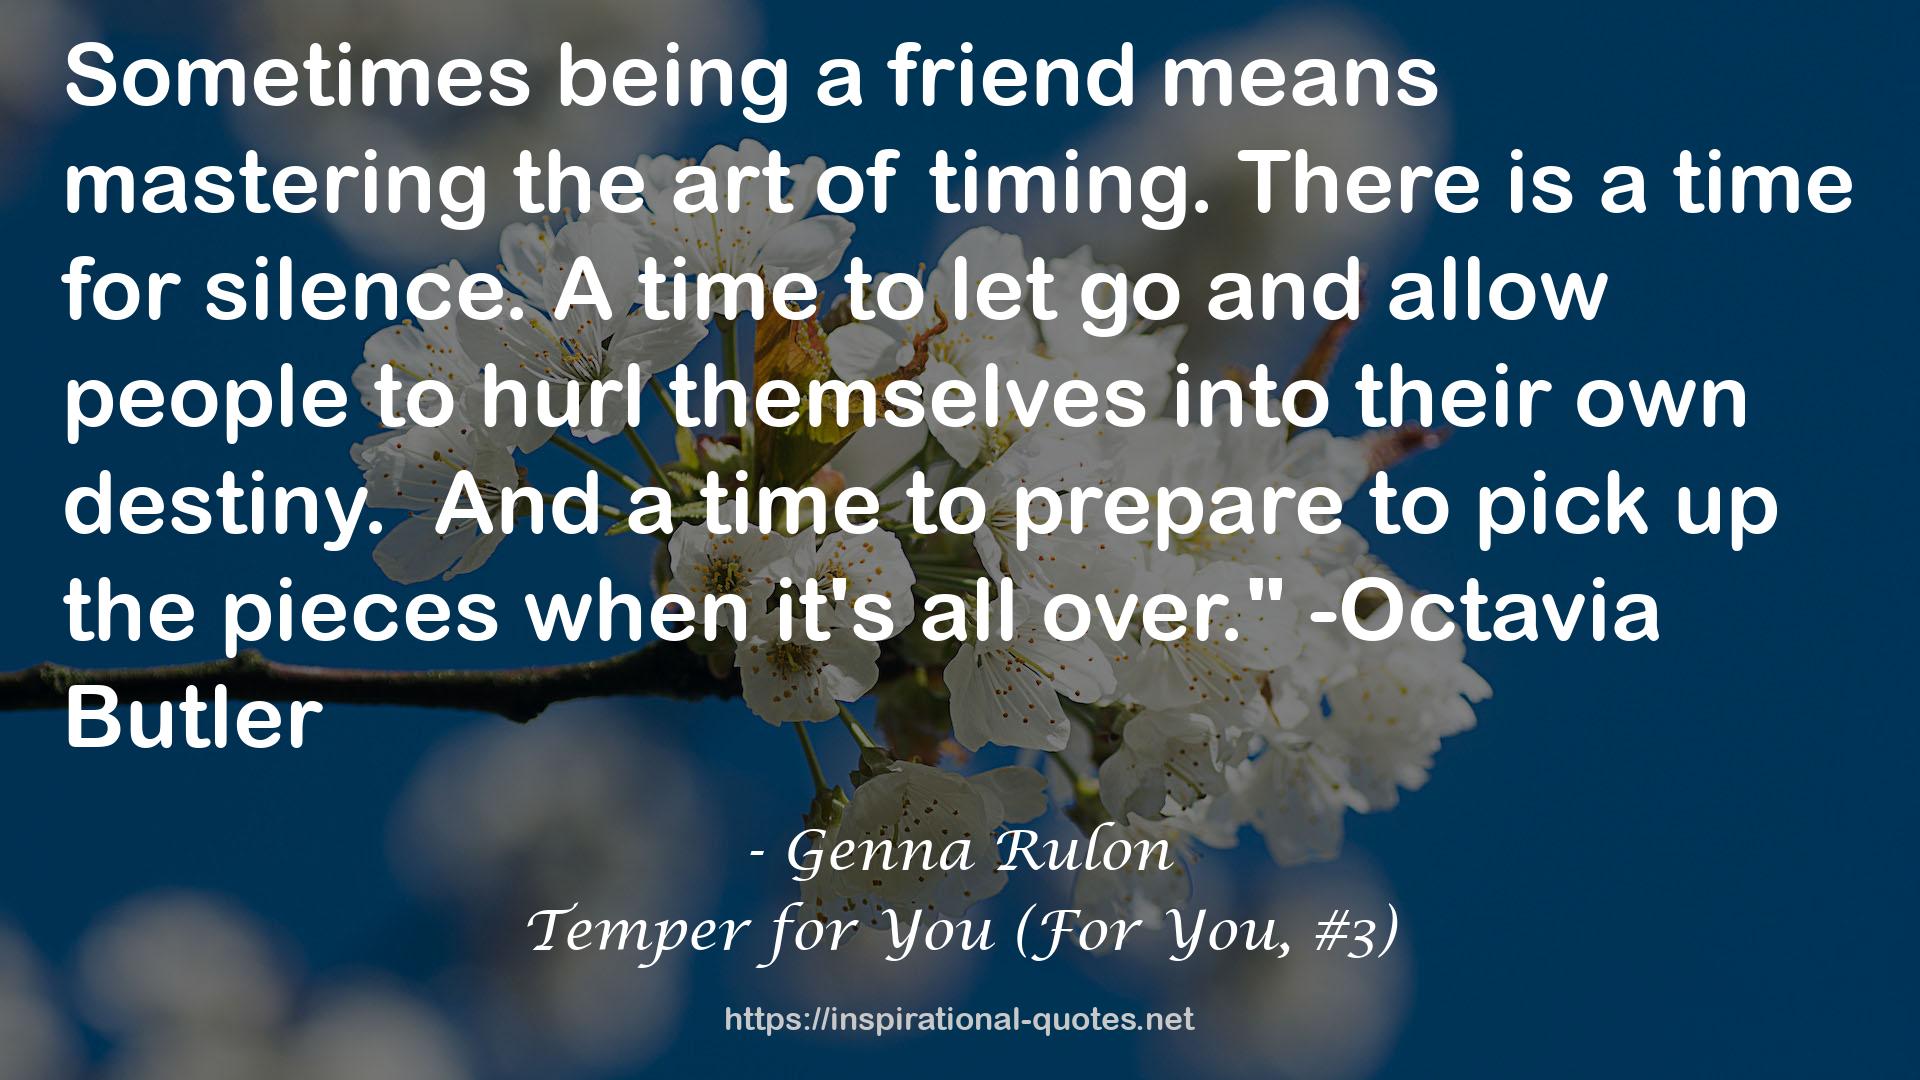 Temper for You (For You, #3) QUOTES